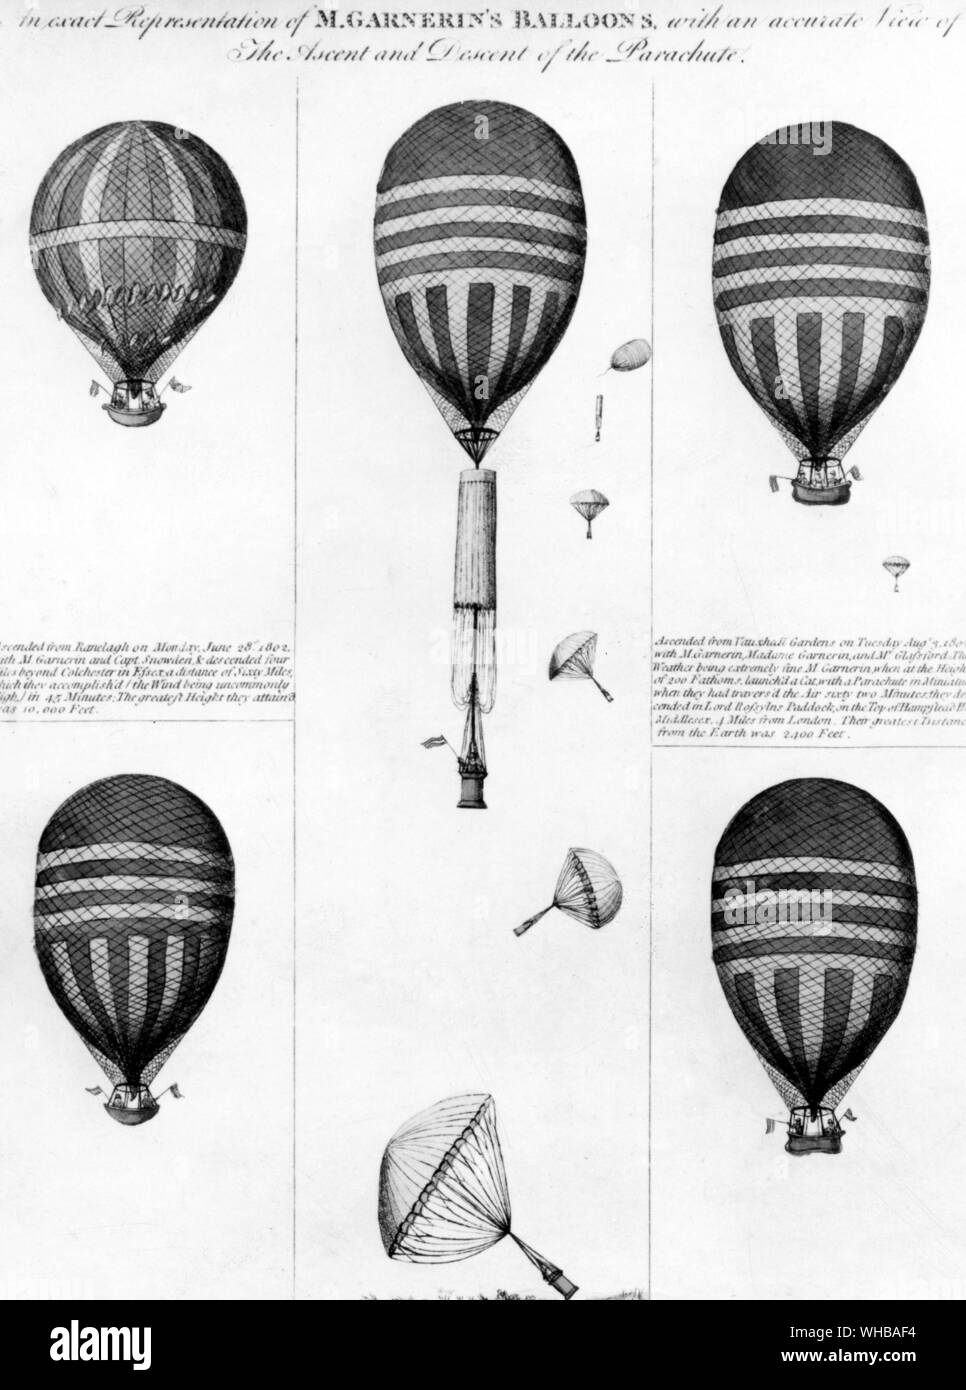 London : An exact Representation of M Garnerin's Balloons with an accurate View of The Ascent and Descent of the Parachute , coloured laquatint , after G Fox , by H Merke. 1802 Stock Photo